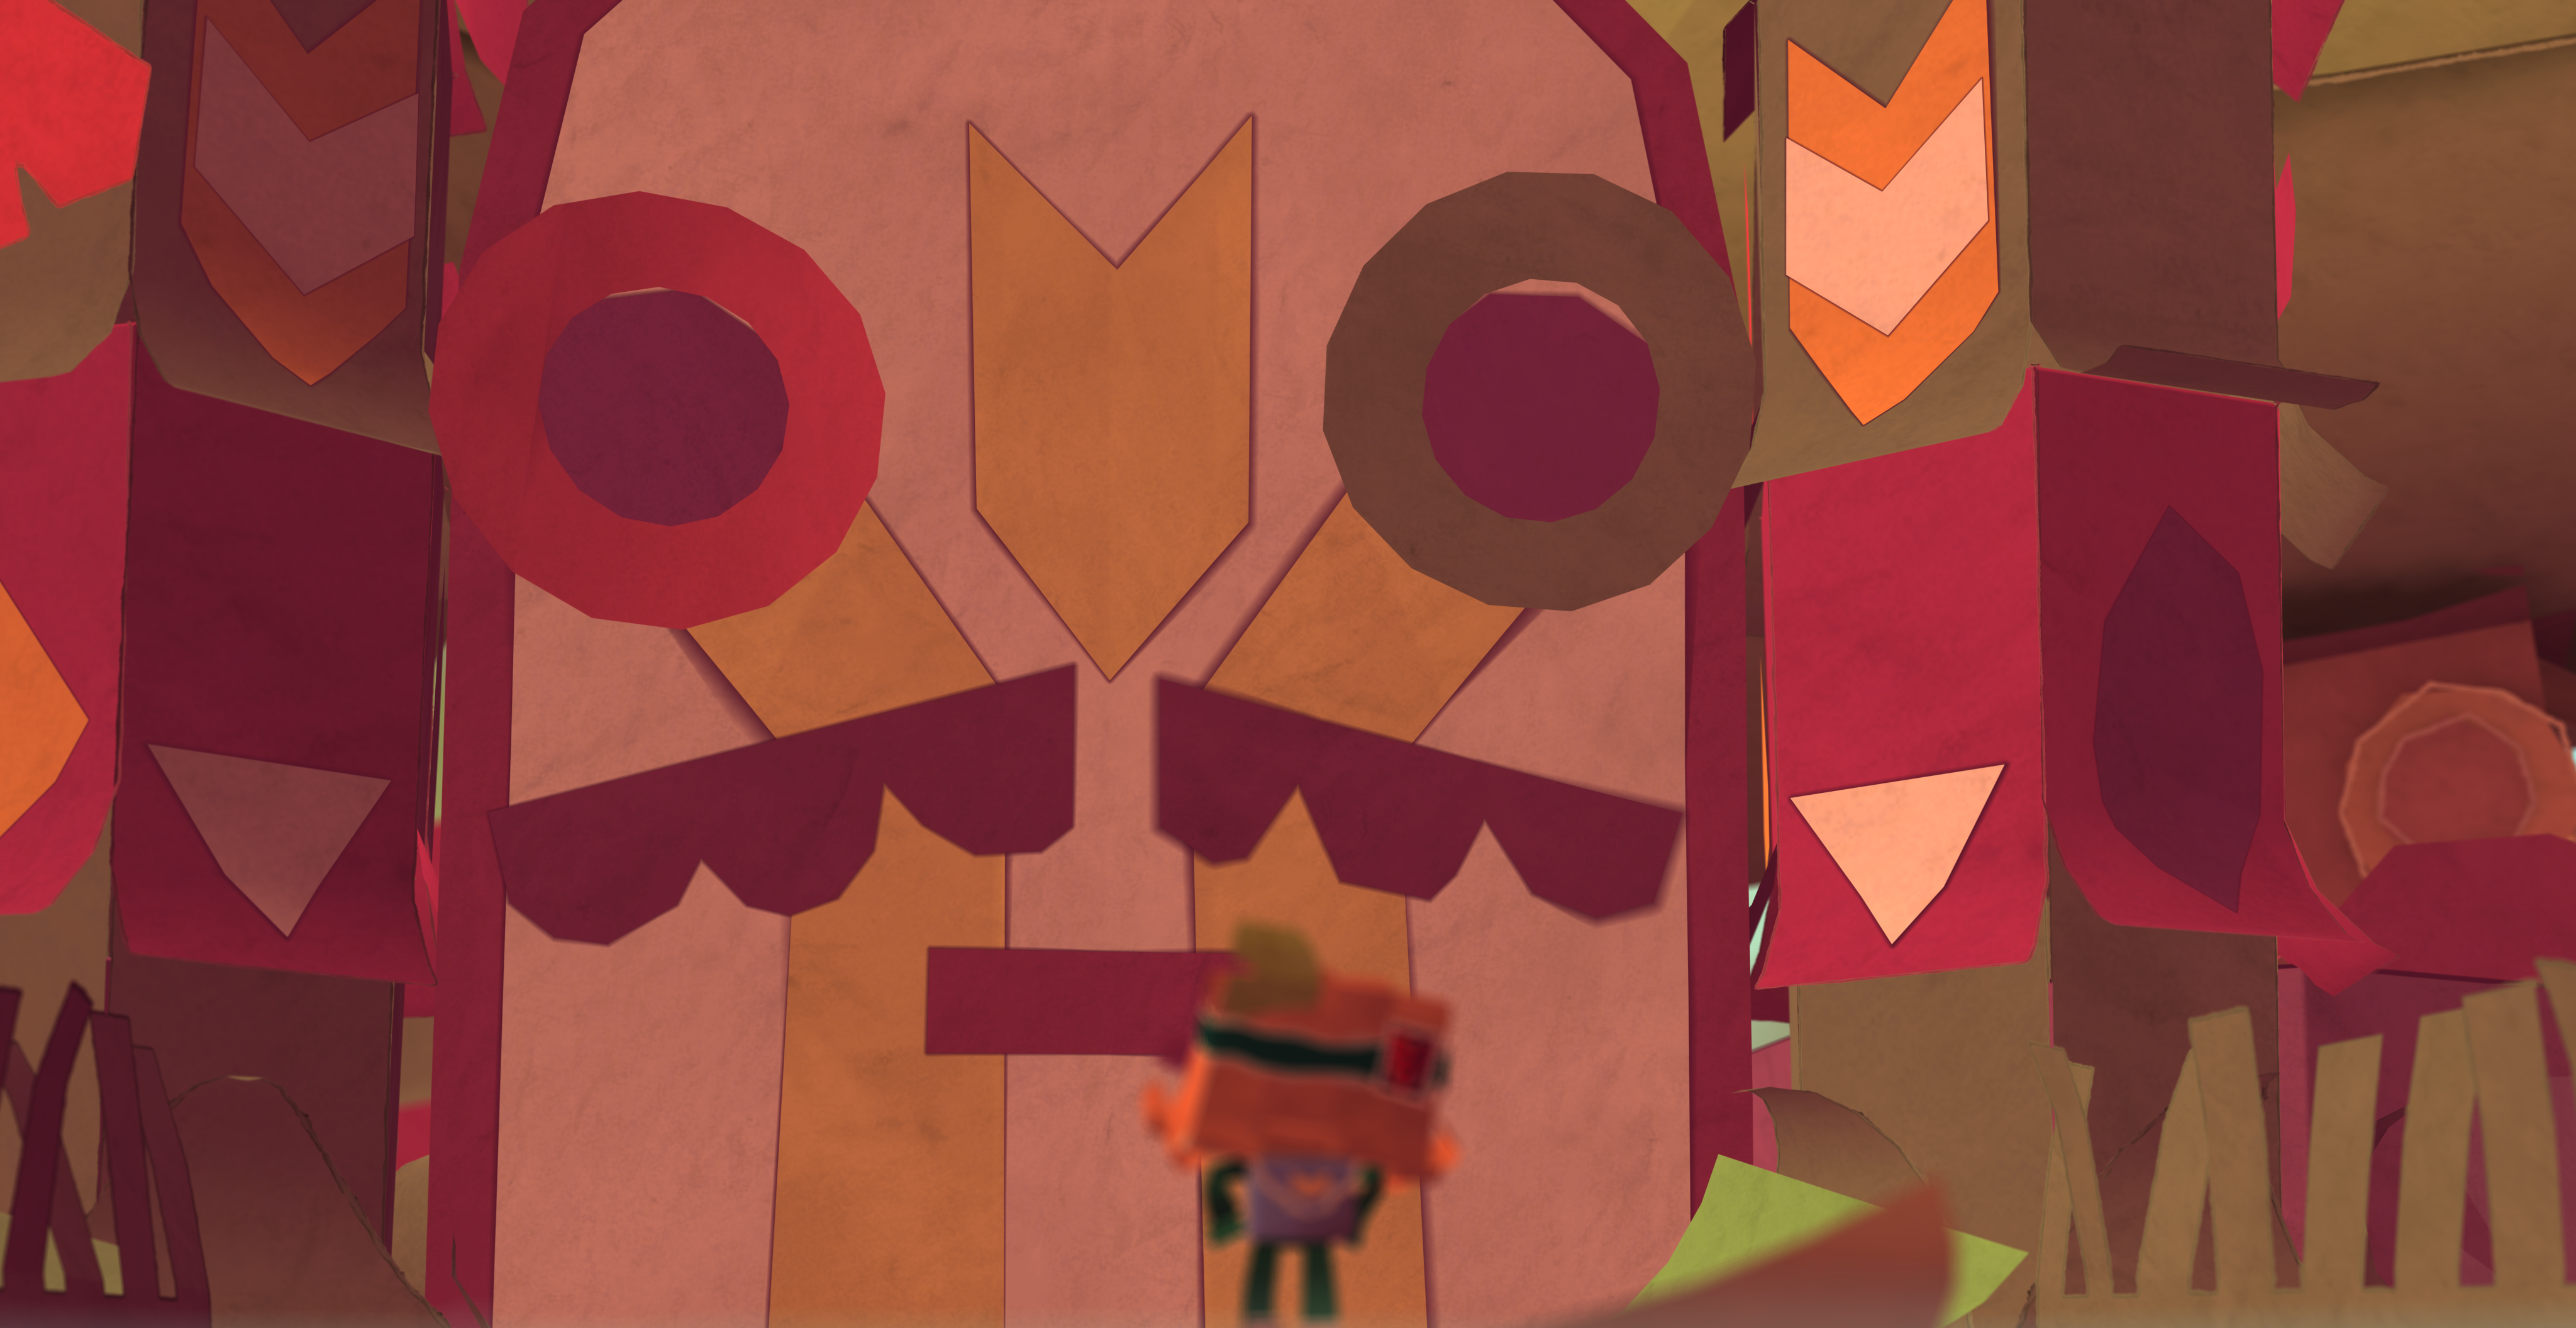 20131101-tearaway-review-highres-01